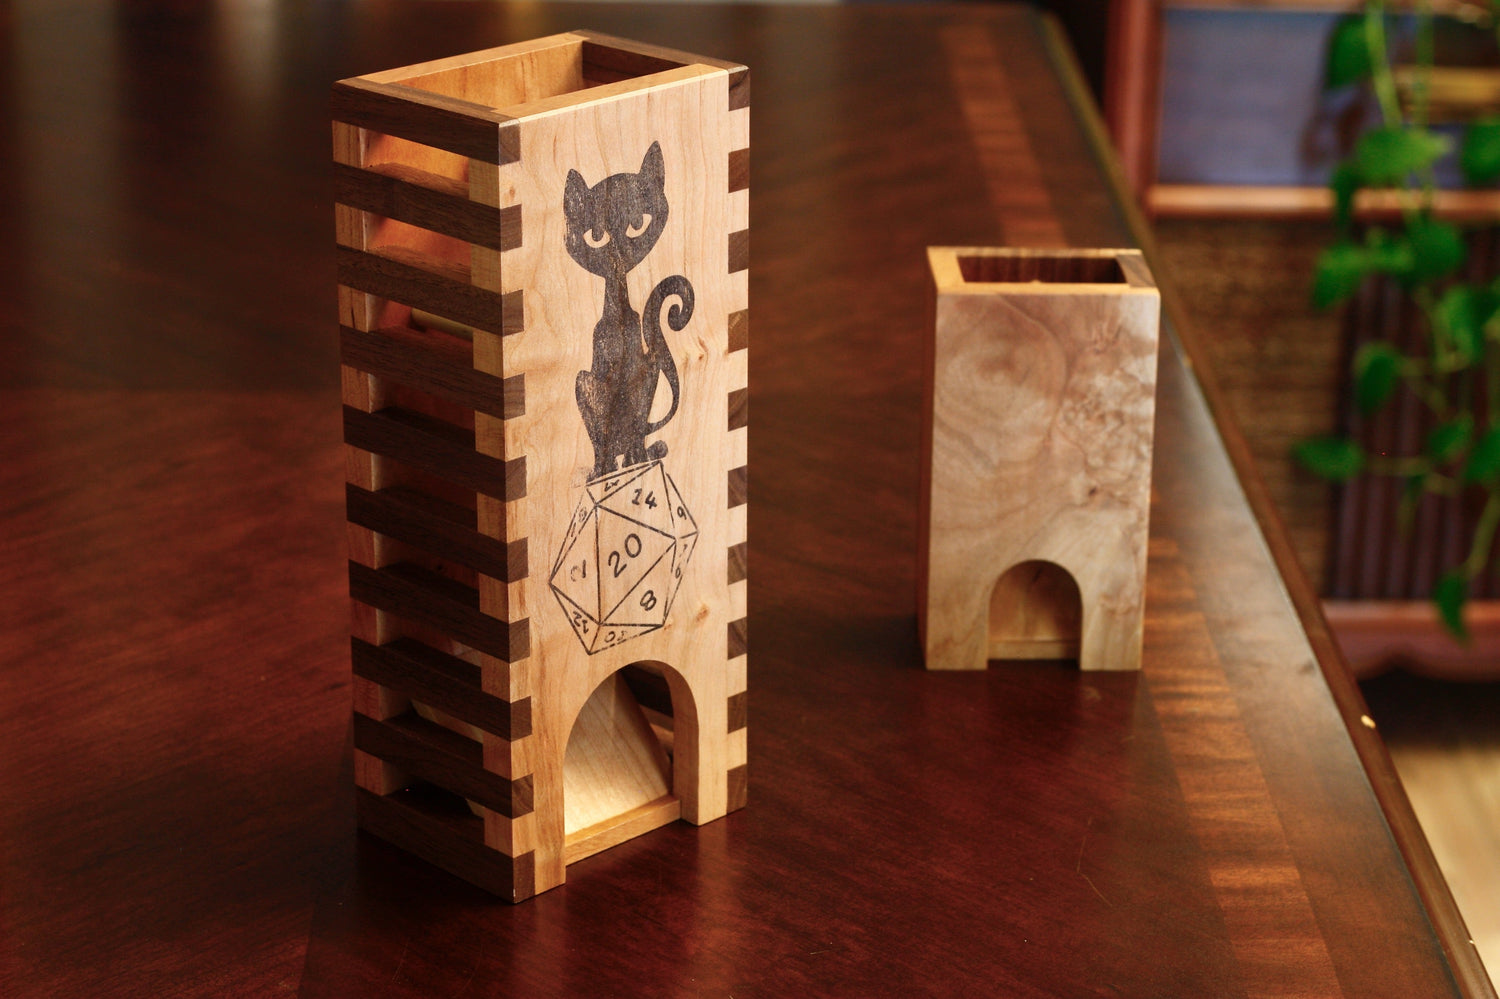 Large wood dice tower with cat and D20 dice design and small cherry dice tower